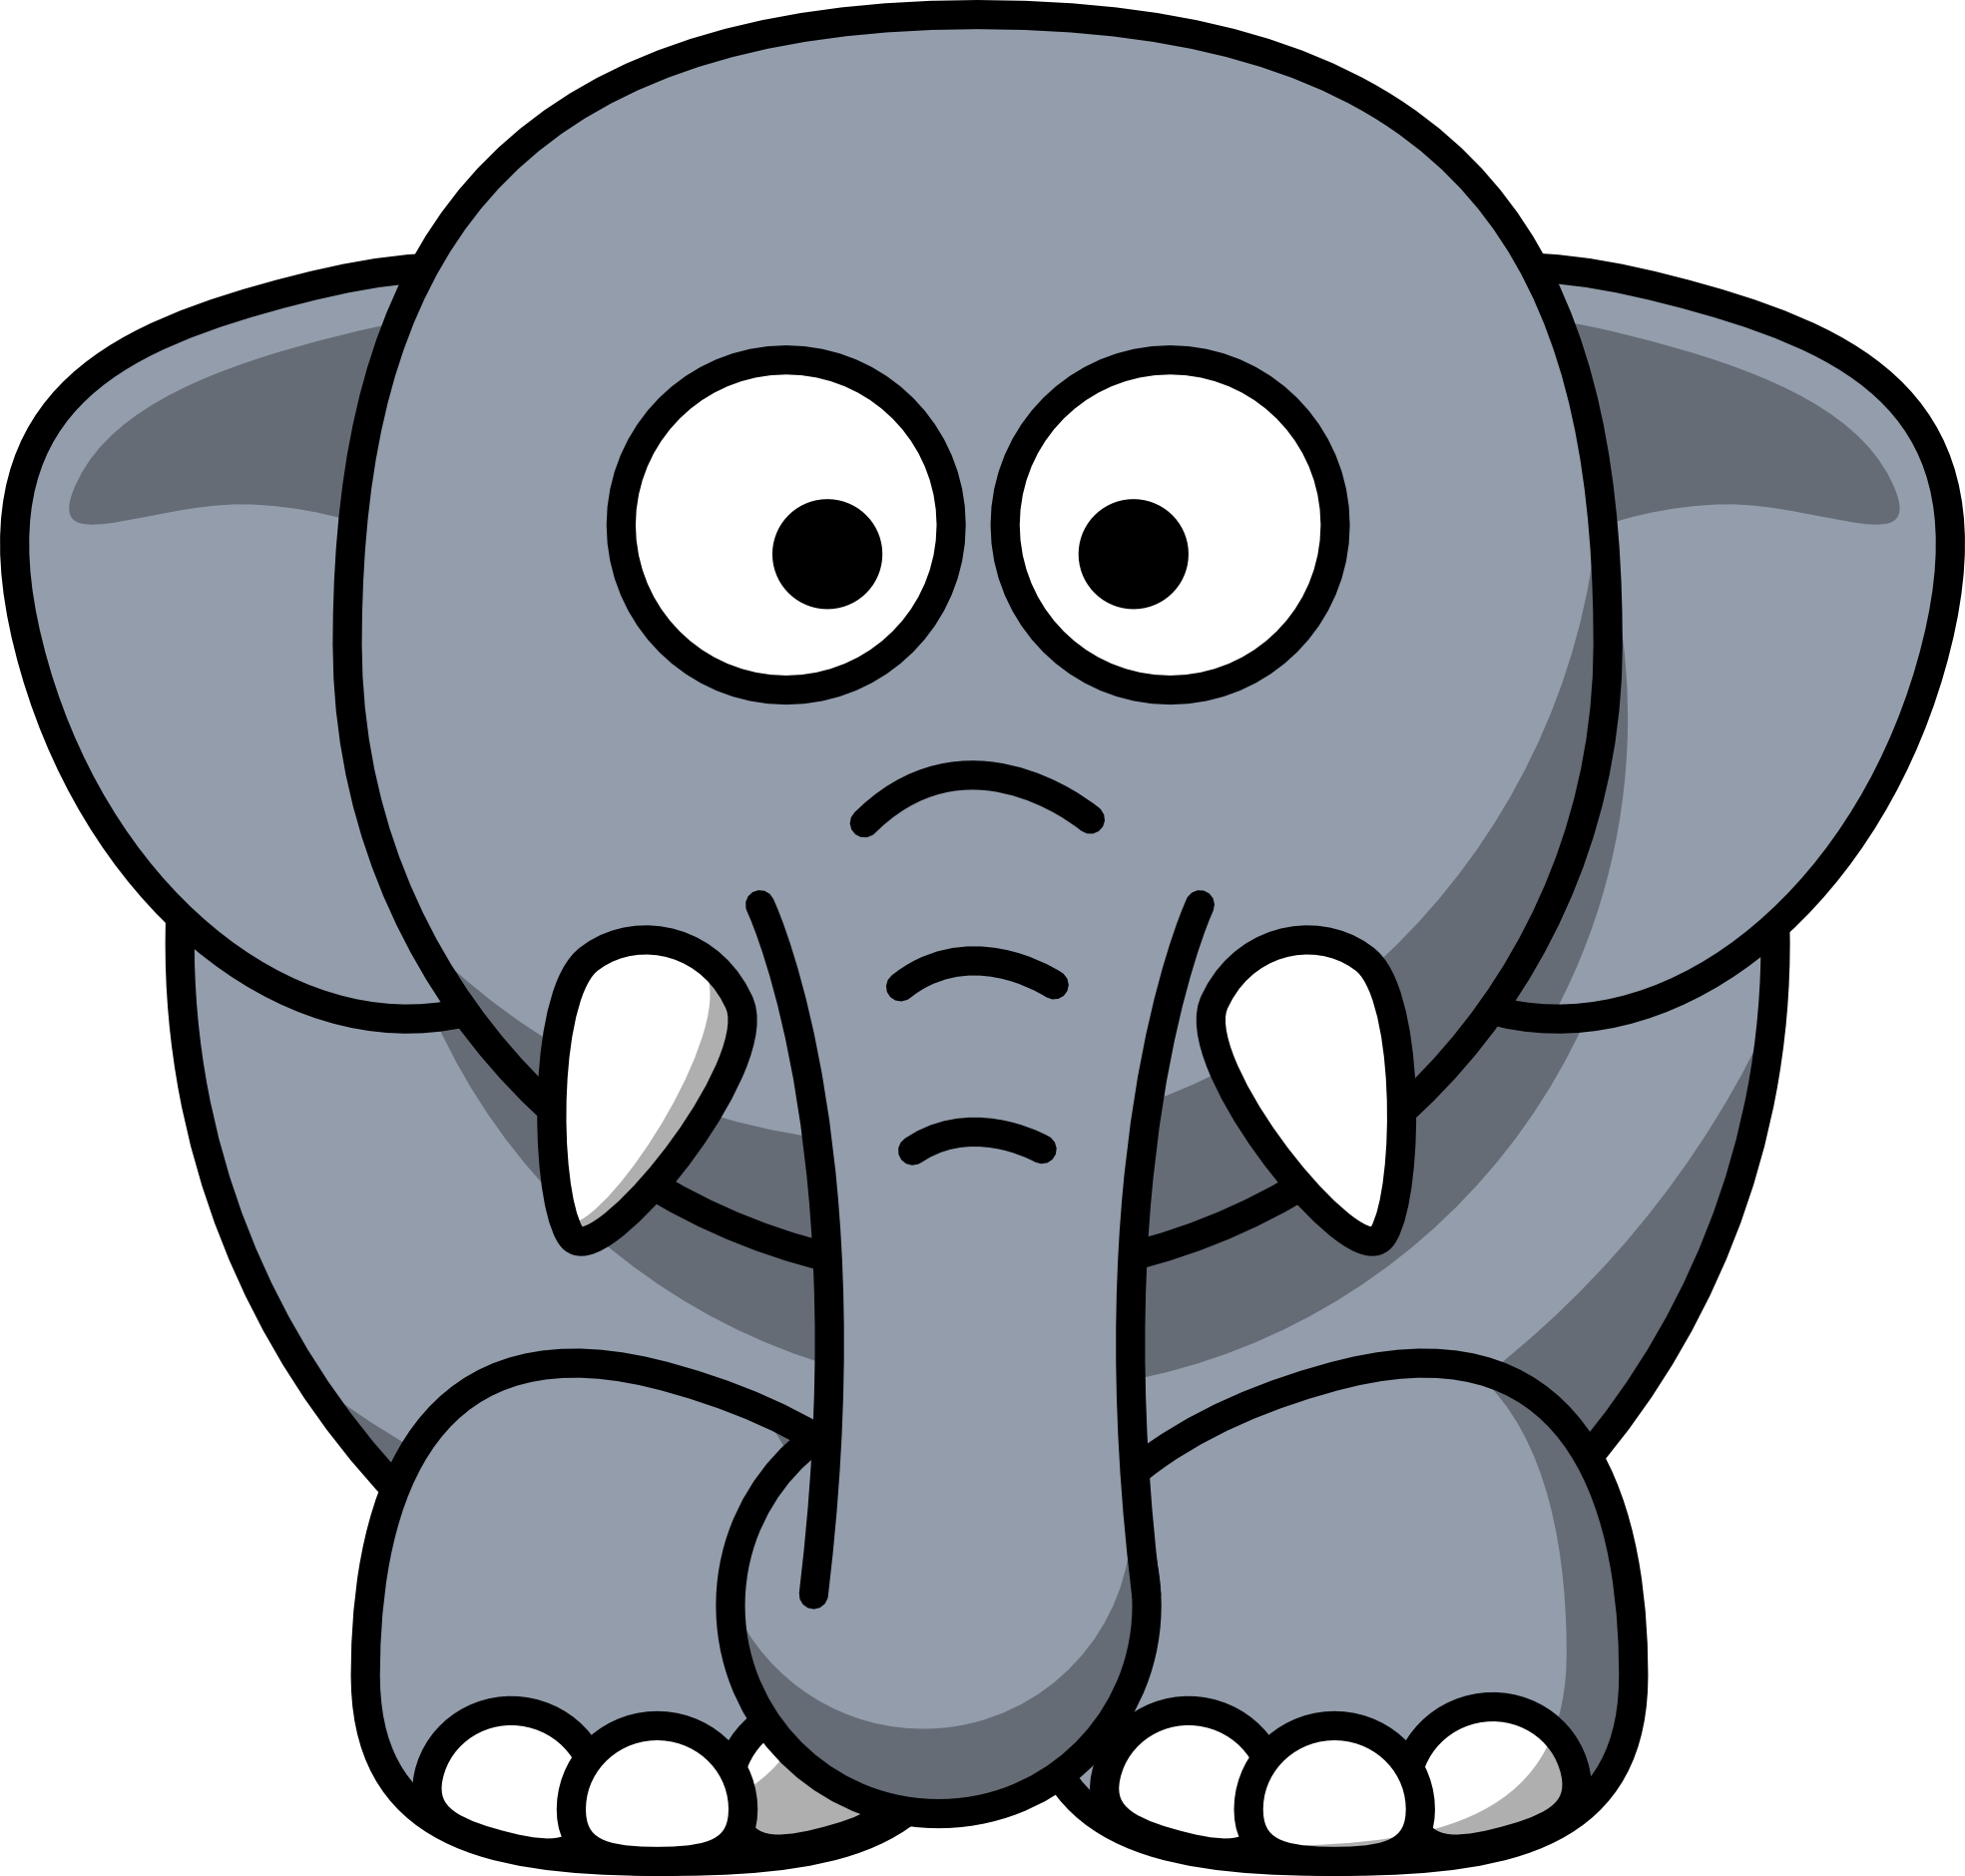 Animals For > Cartoon Elephant Head Side View - ClipArt Best ...